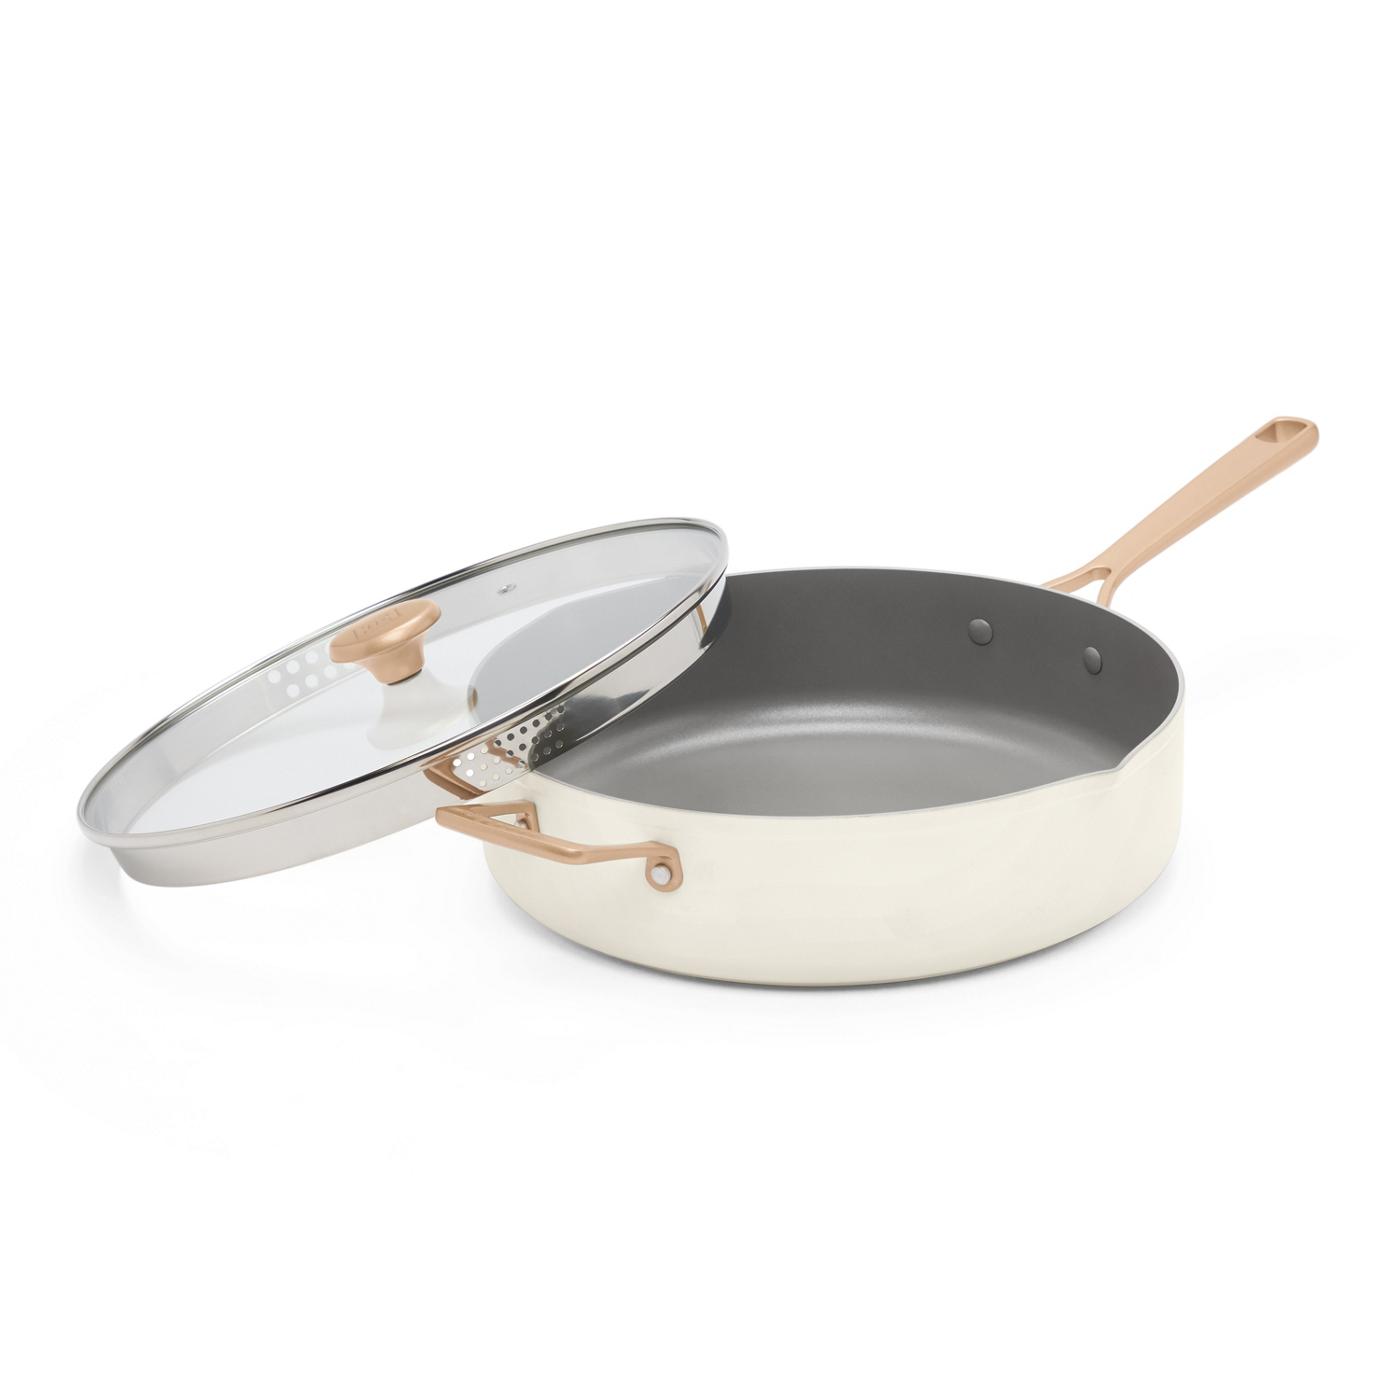 Kitchen & Table by H-E-B Non-Stick Sauté Pan with Strainer Lid - Cloud White; image 1 of 5